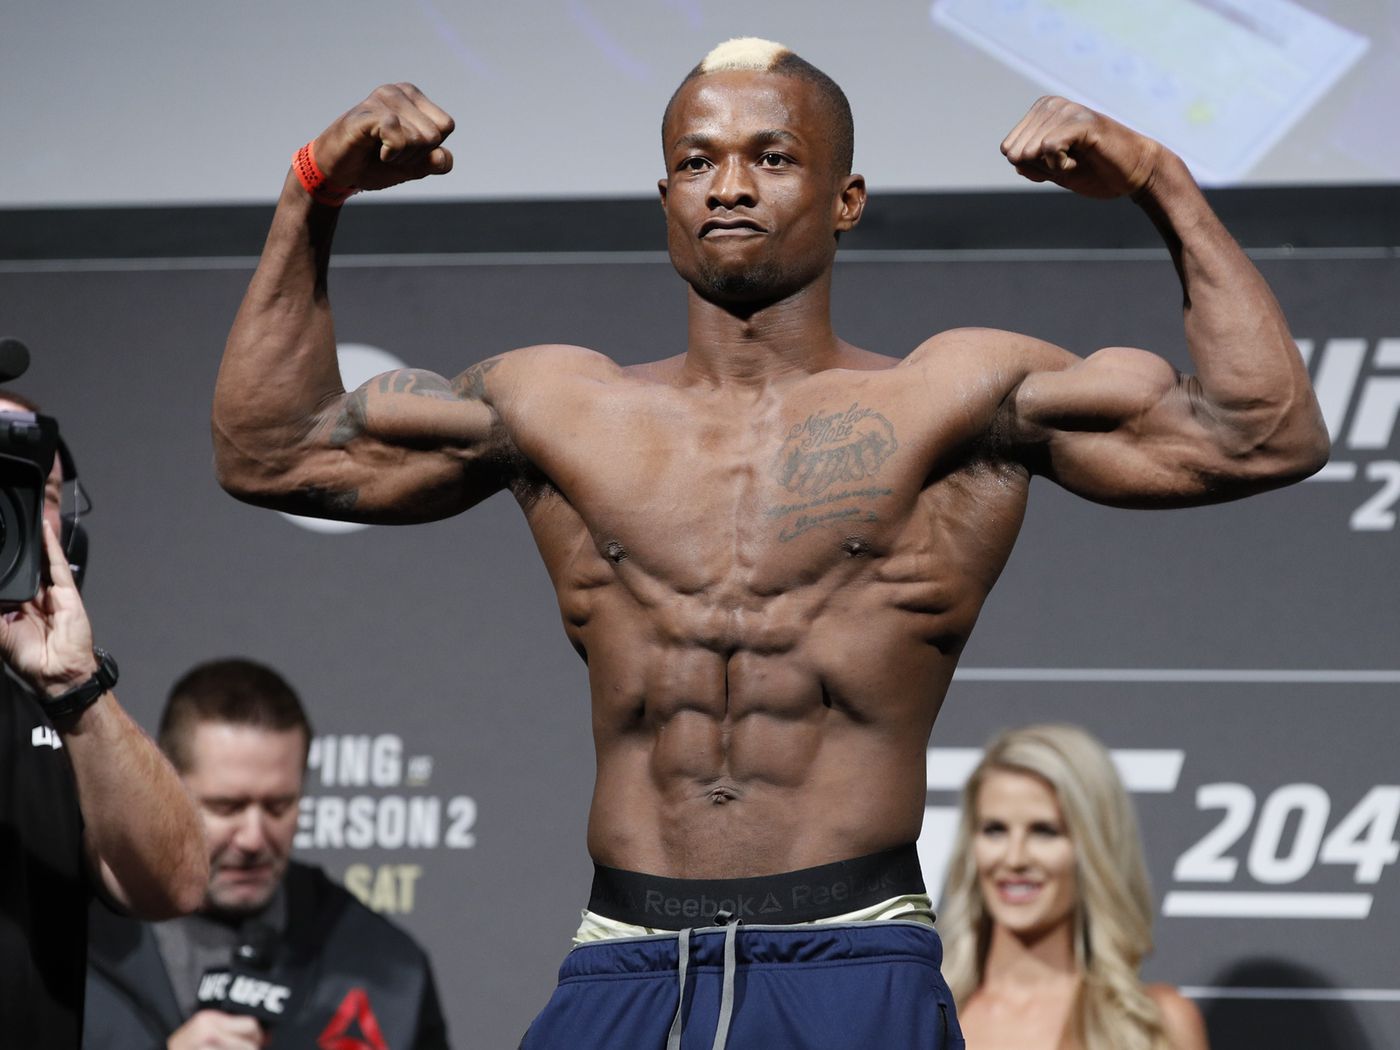 Marc Diakiese vs. Stevie Ray booked for UFC London - MMA Fighting